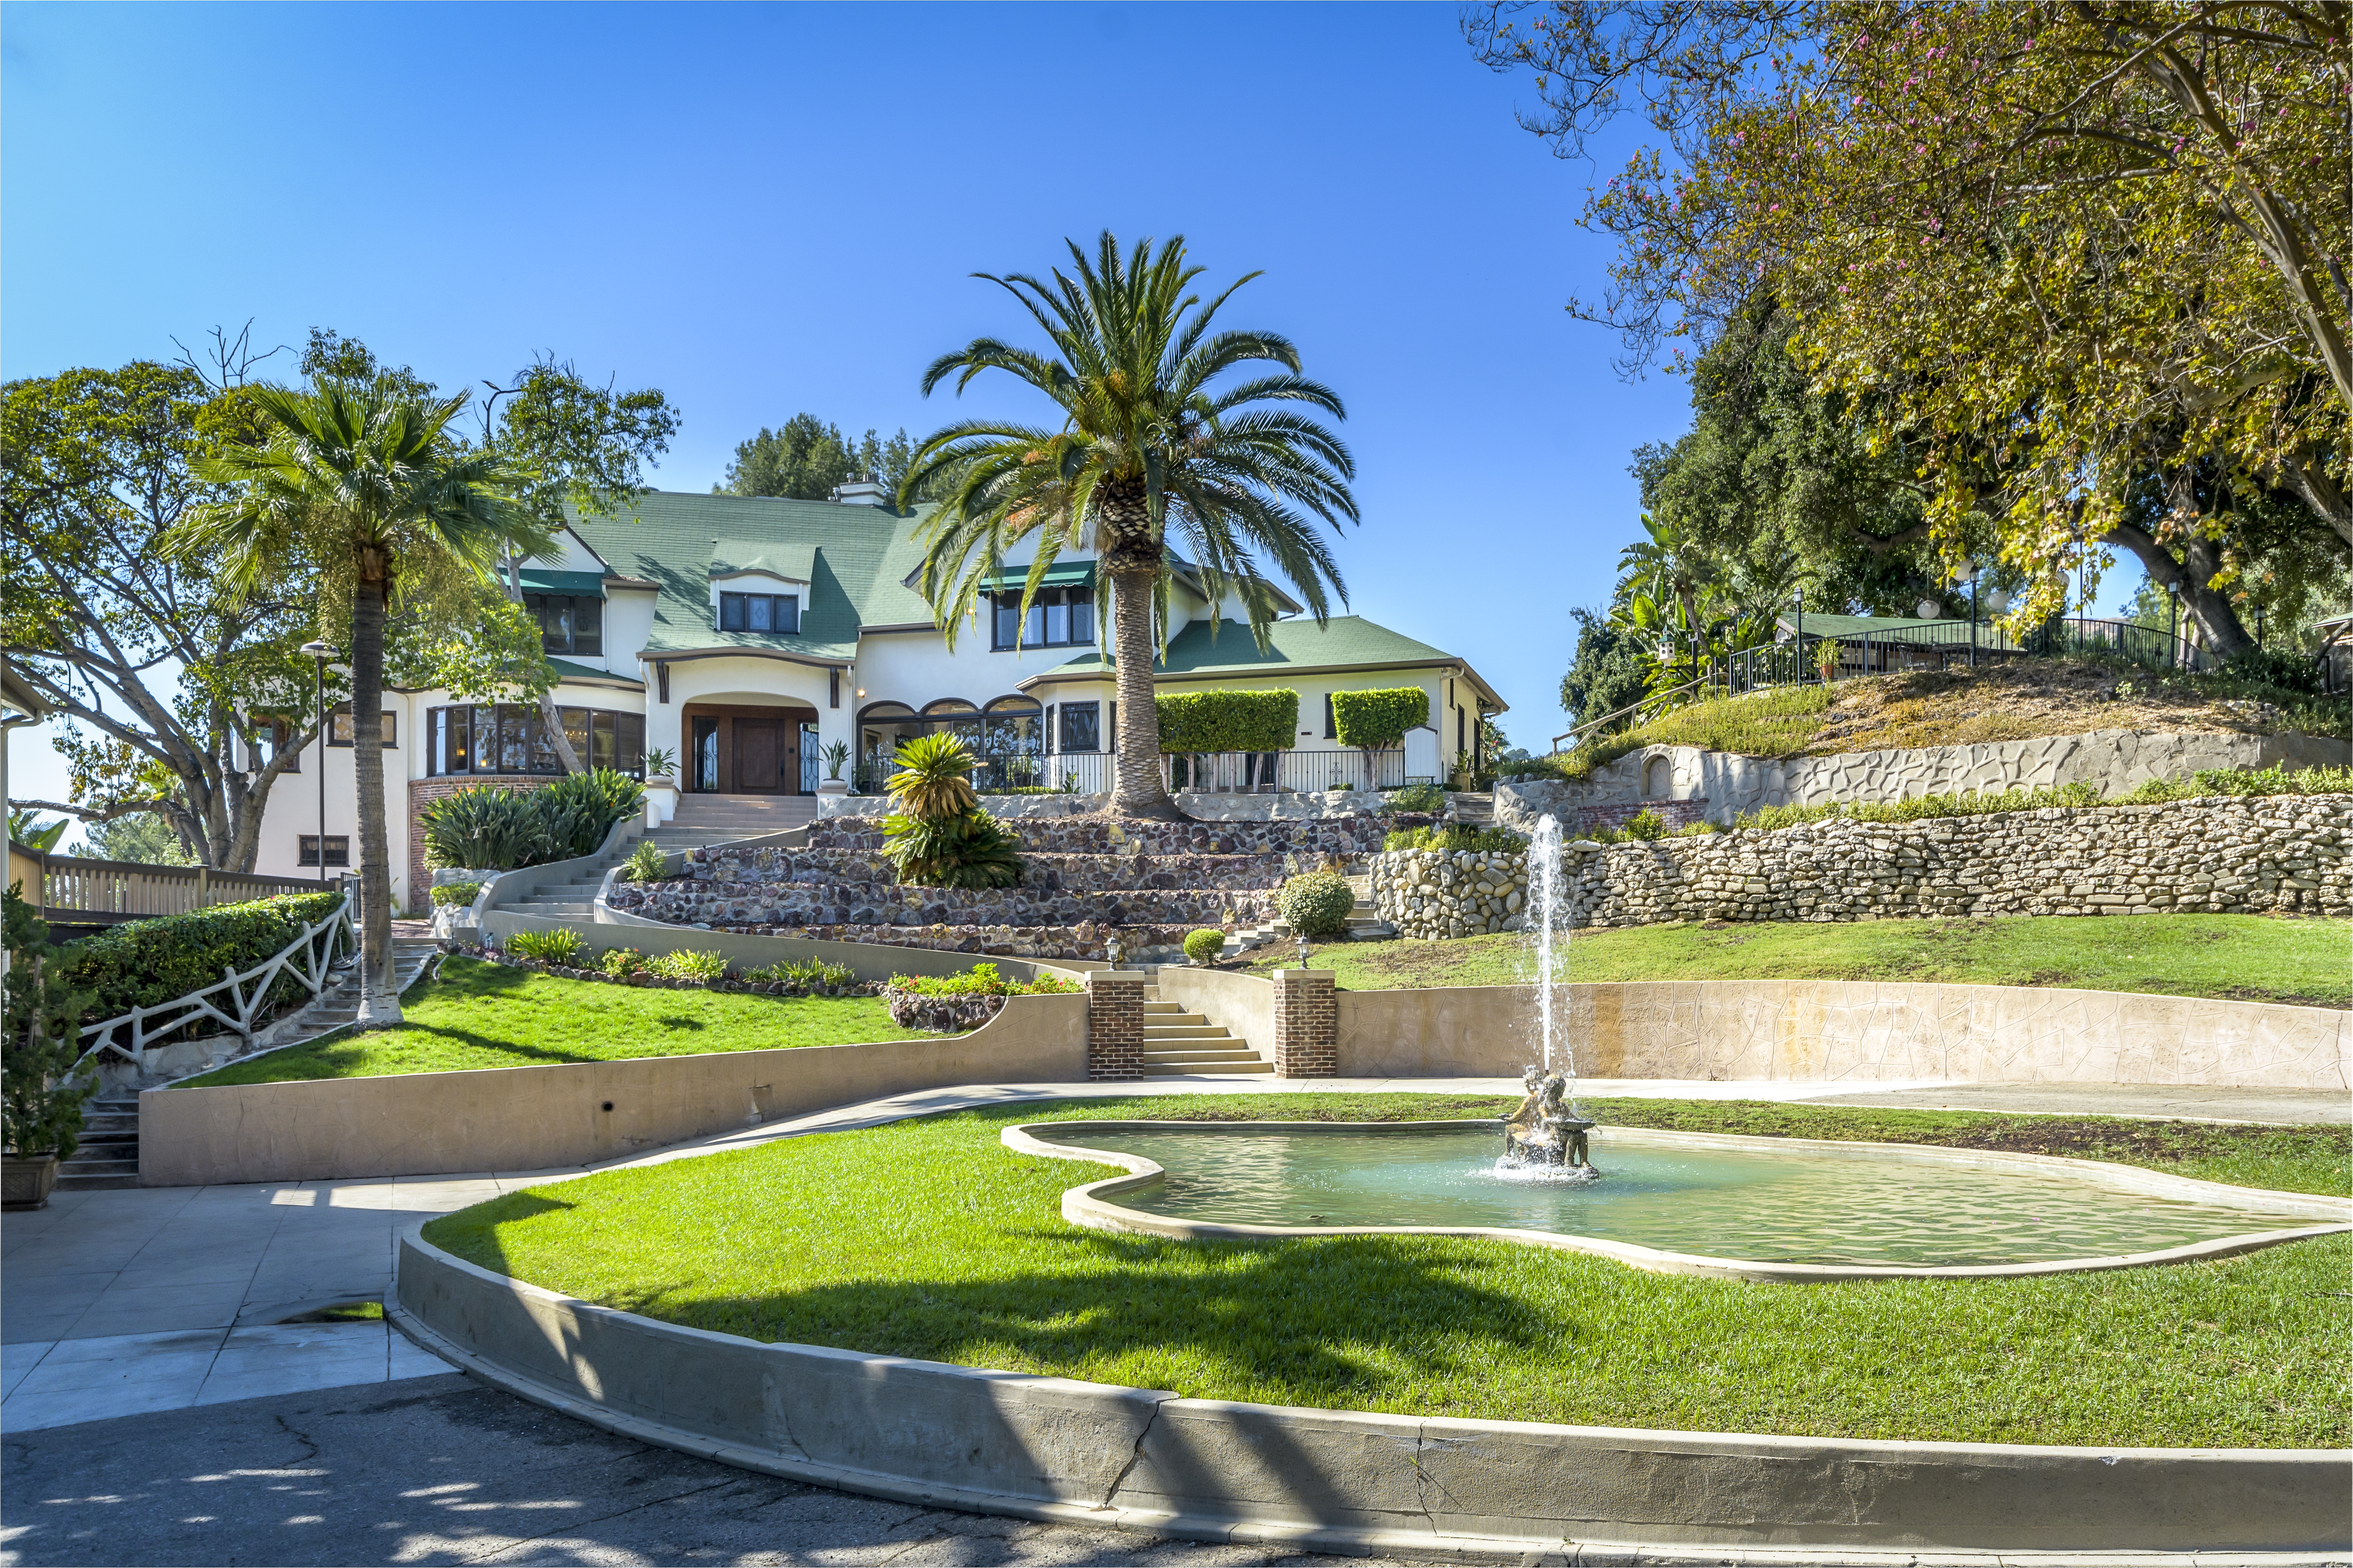 katy perrys plan to buy an eagle rock mansion for catholic priests falls through